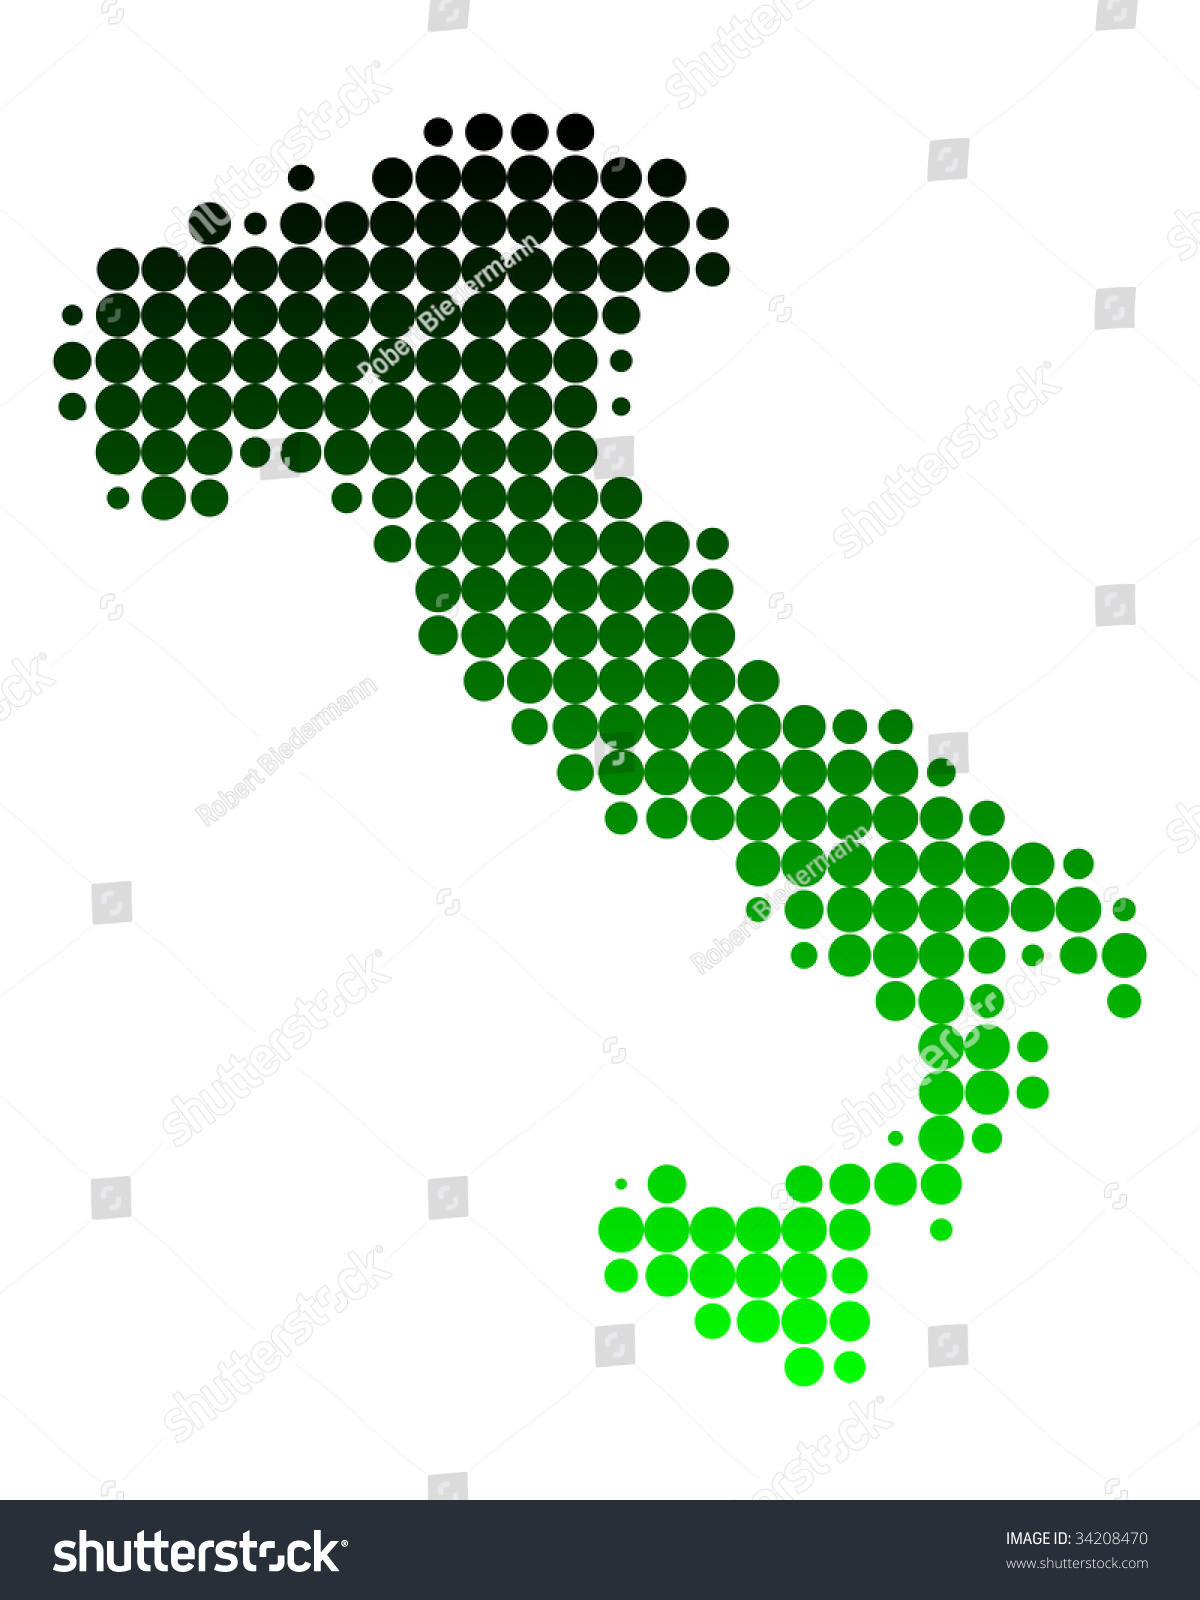 Map of Italy #34208470